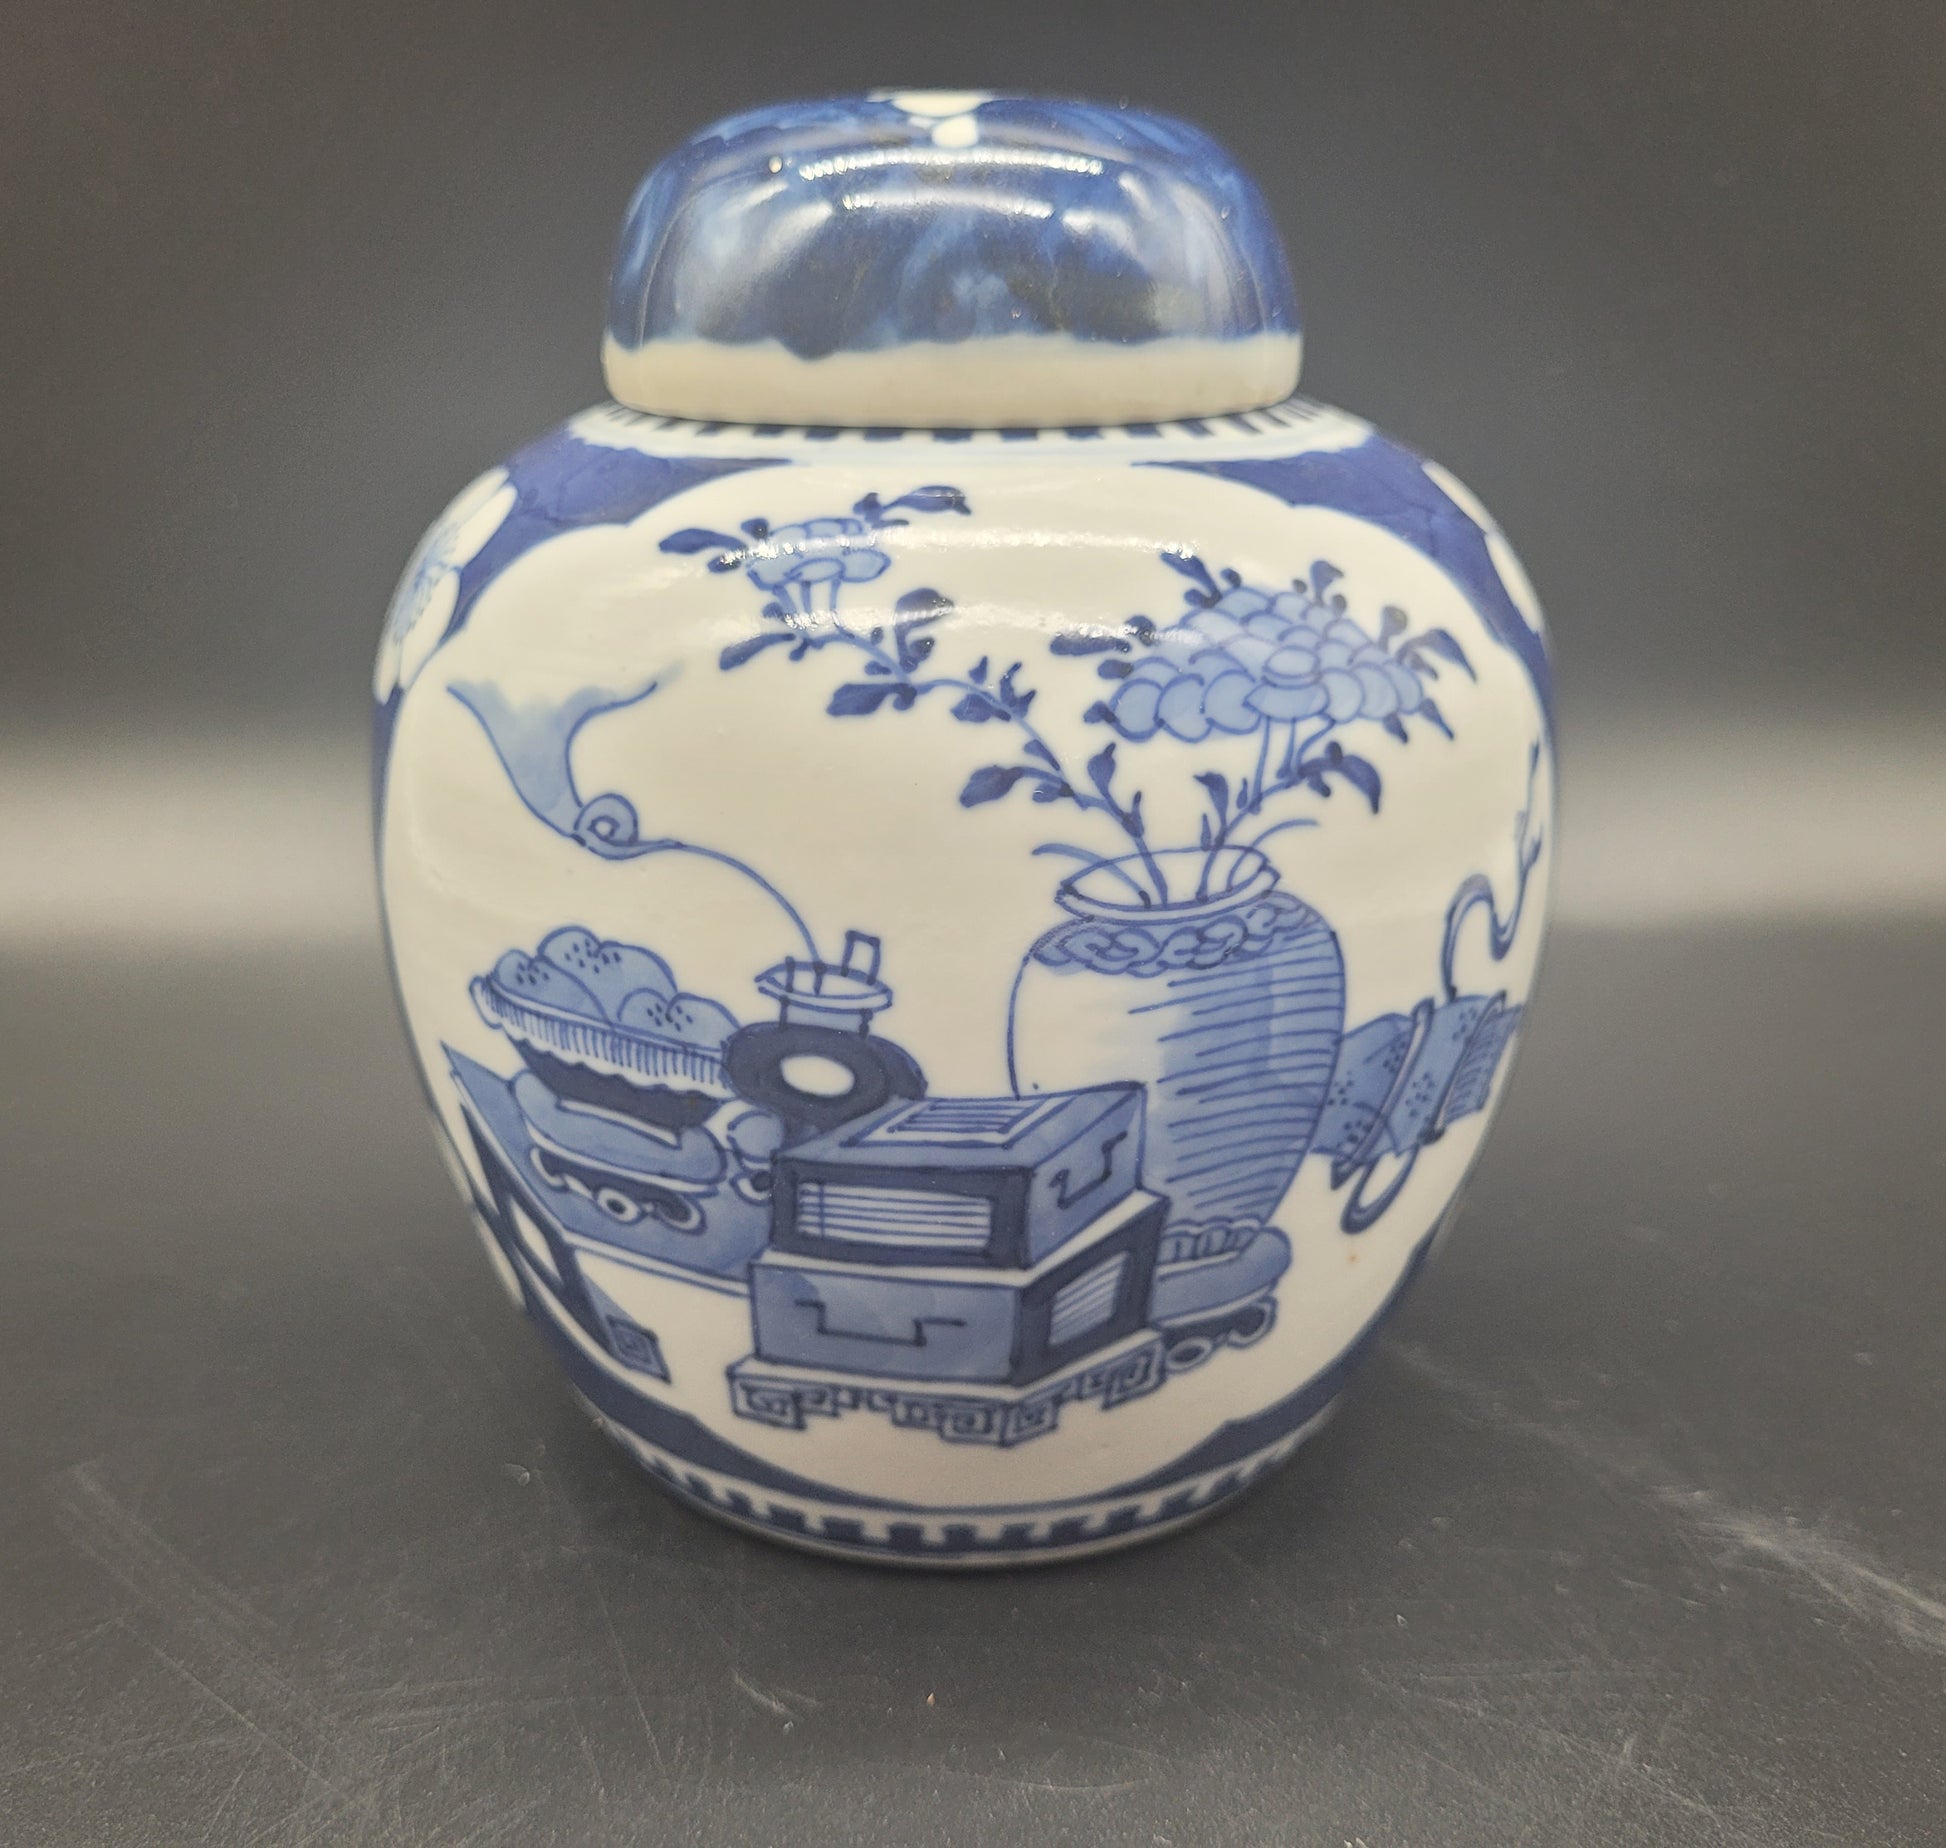 ANTIQUES & COLLECTABLES USA Hand Painted Chinese 19th Century Ginger Jar & Lid Decorated in the Prunus Precious Objects Pattern 4 Character Mark 